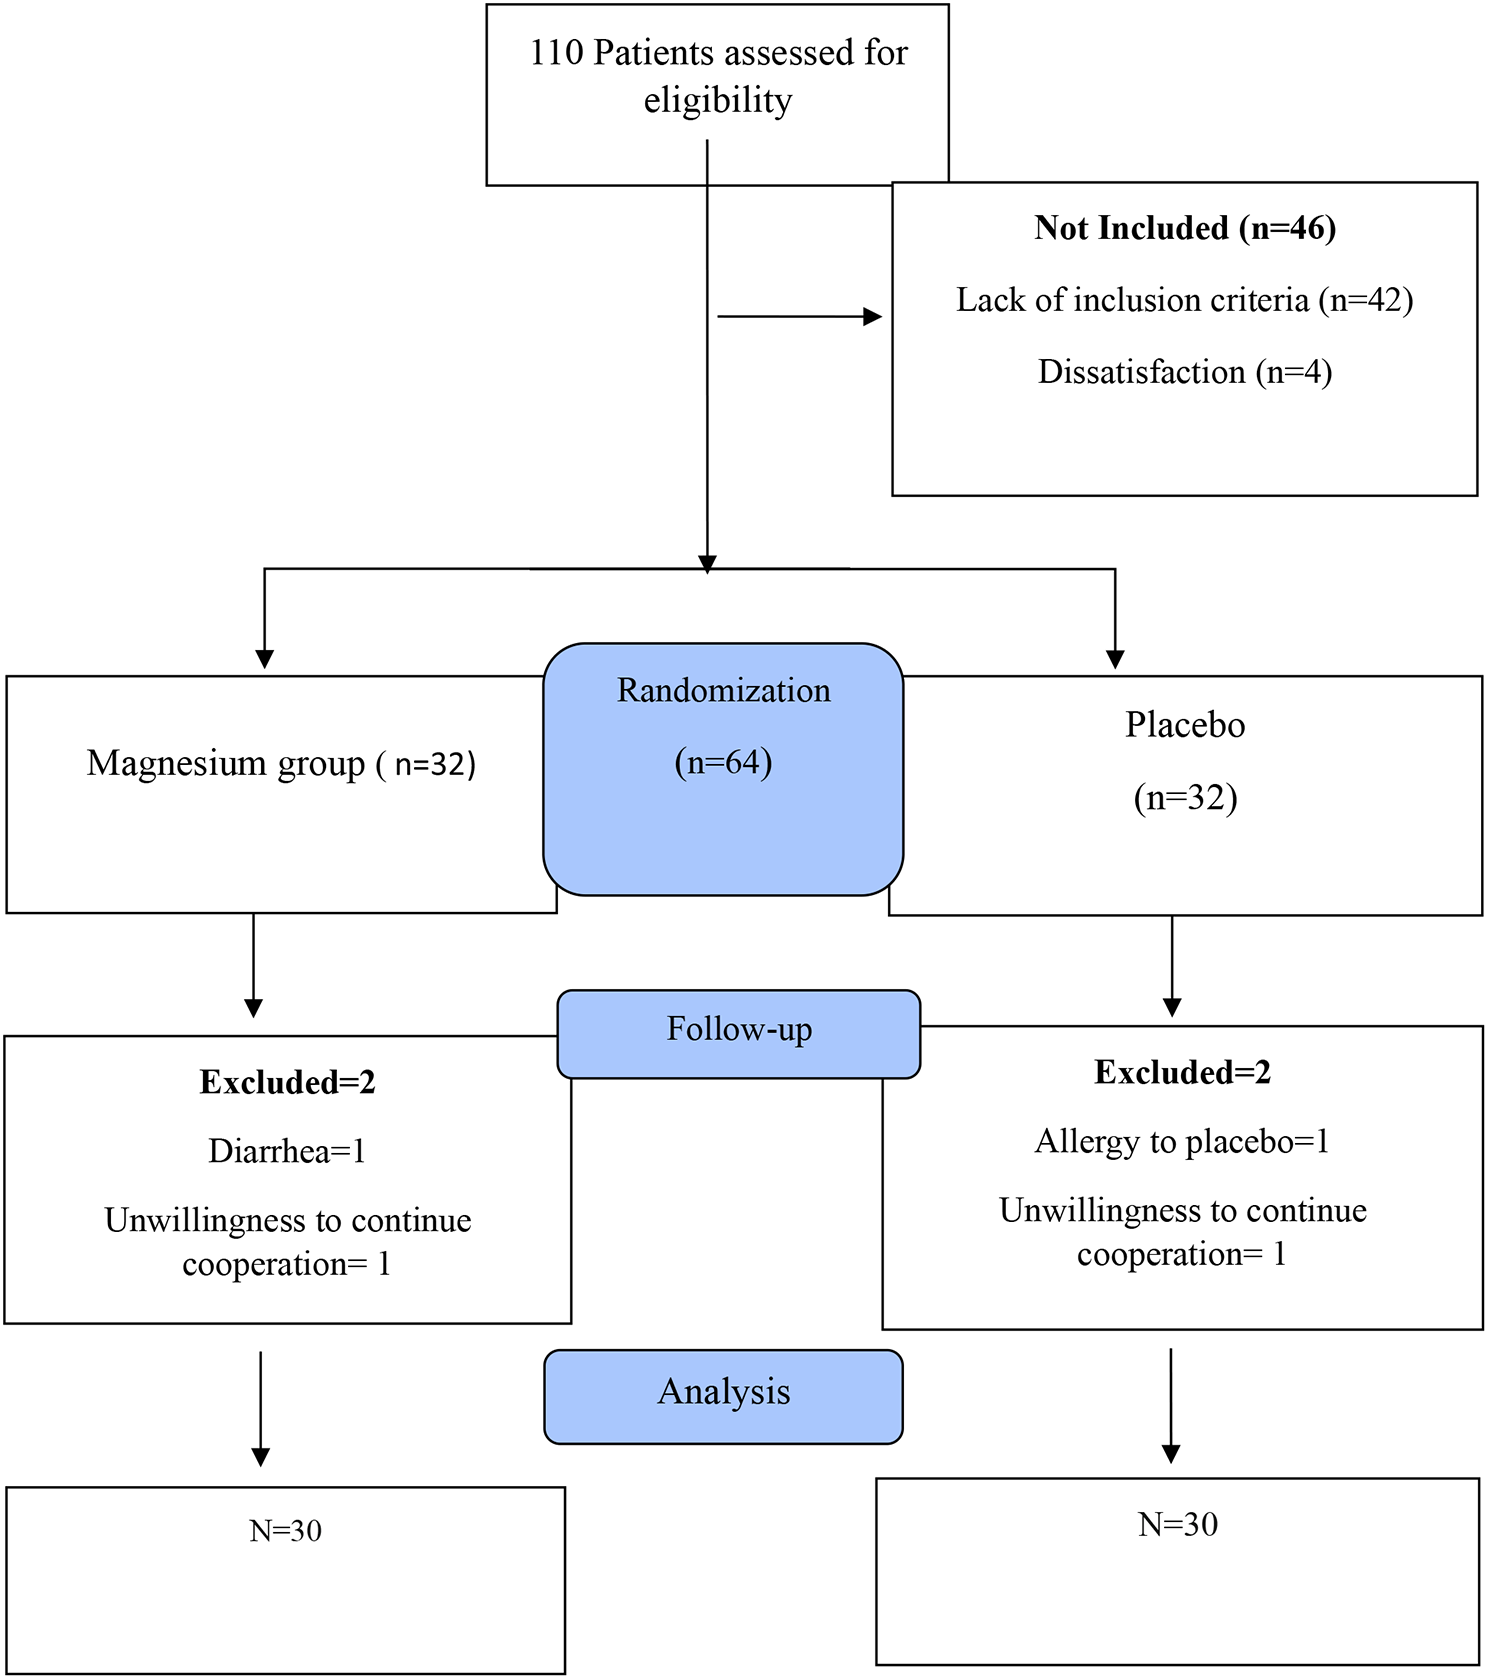 A randomized clinical trial investigating the impact of magnesium supplementation on clinical and biochemical measures in COVID-19 patients